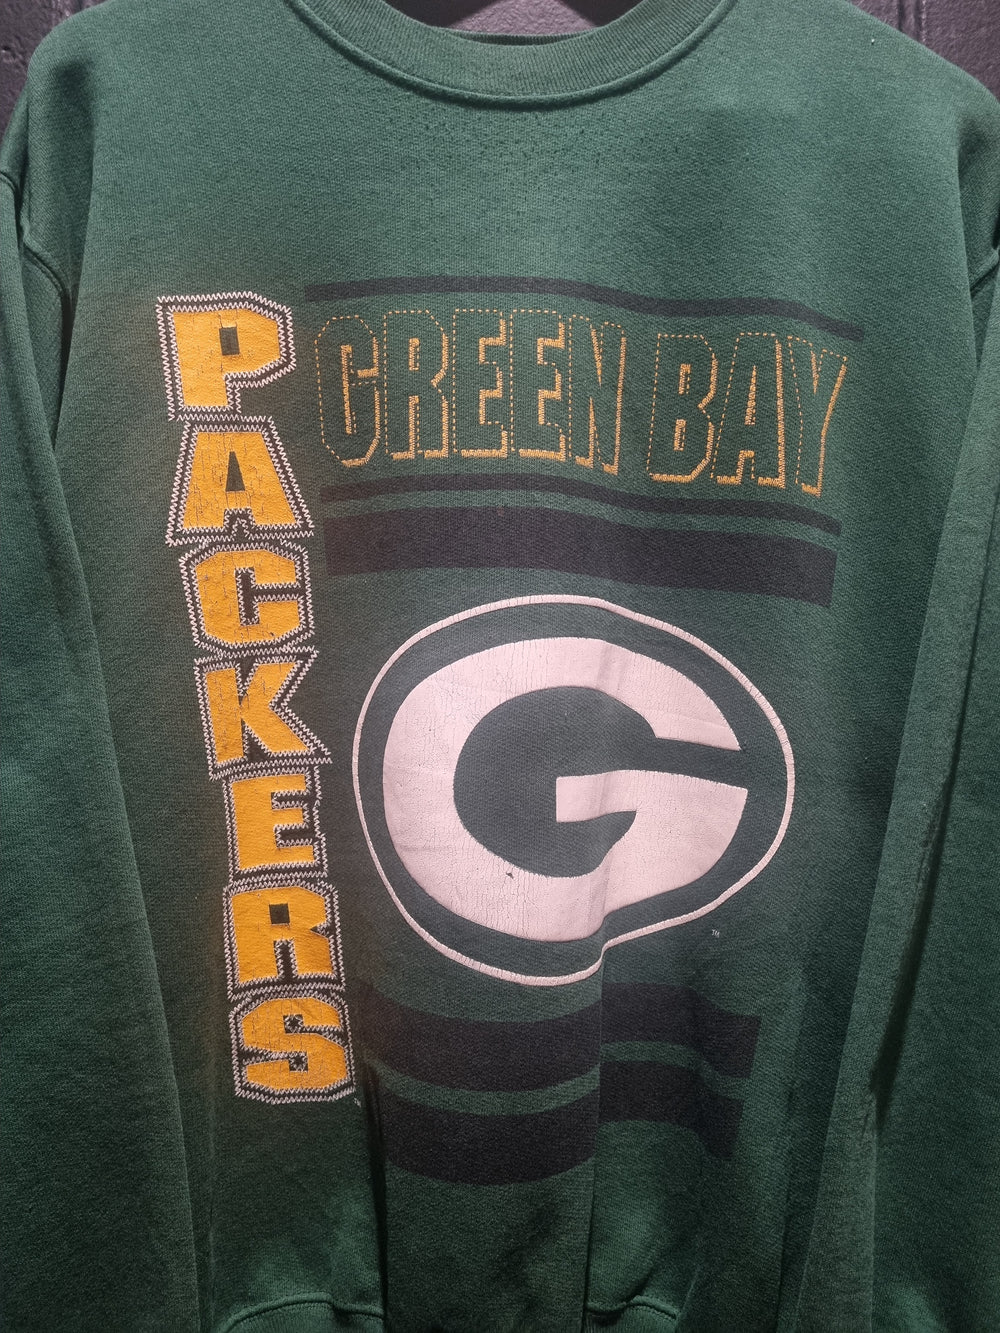 Green Bay Packers Team Rated Large